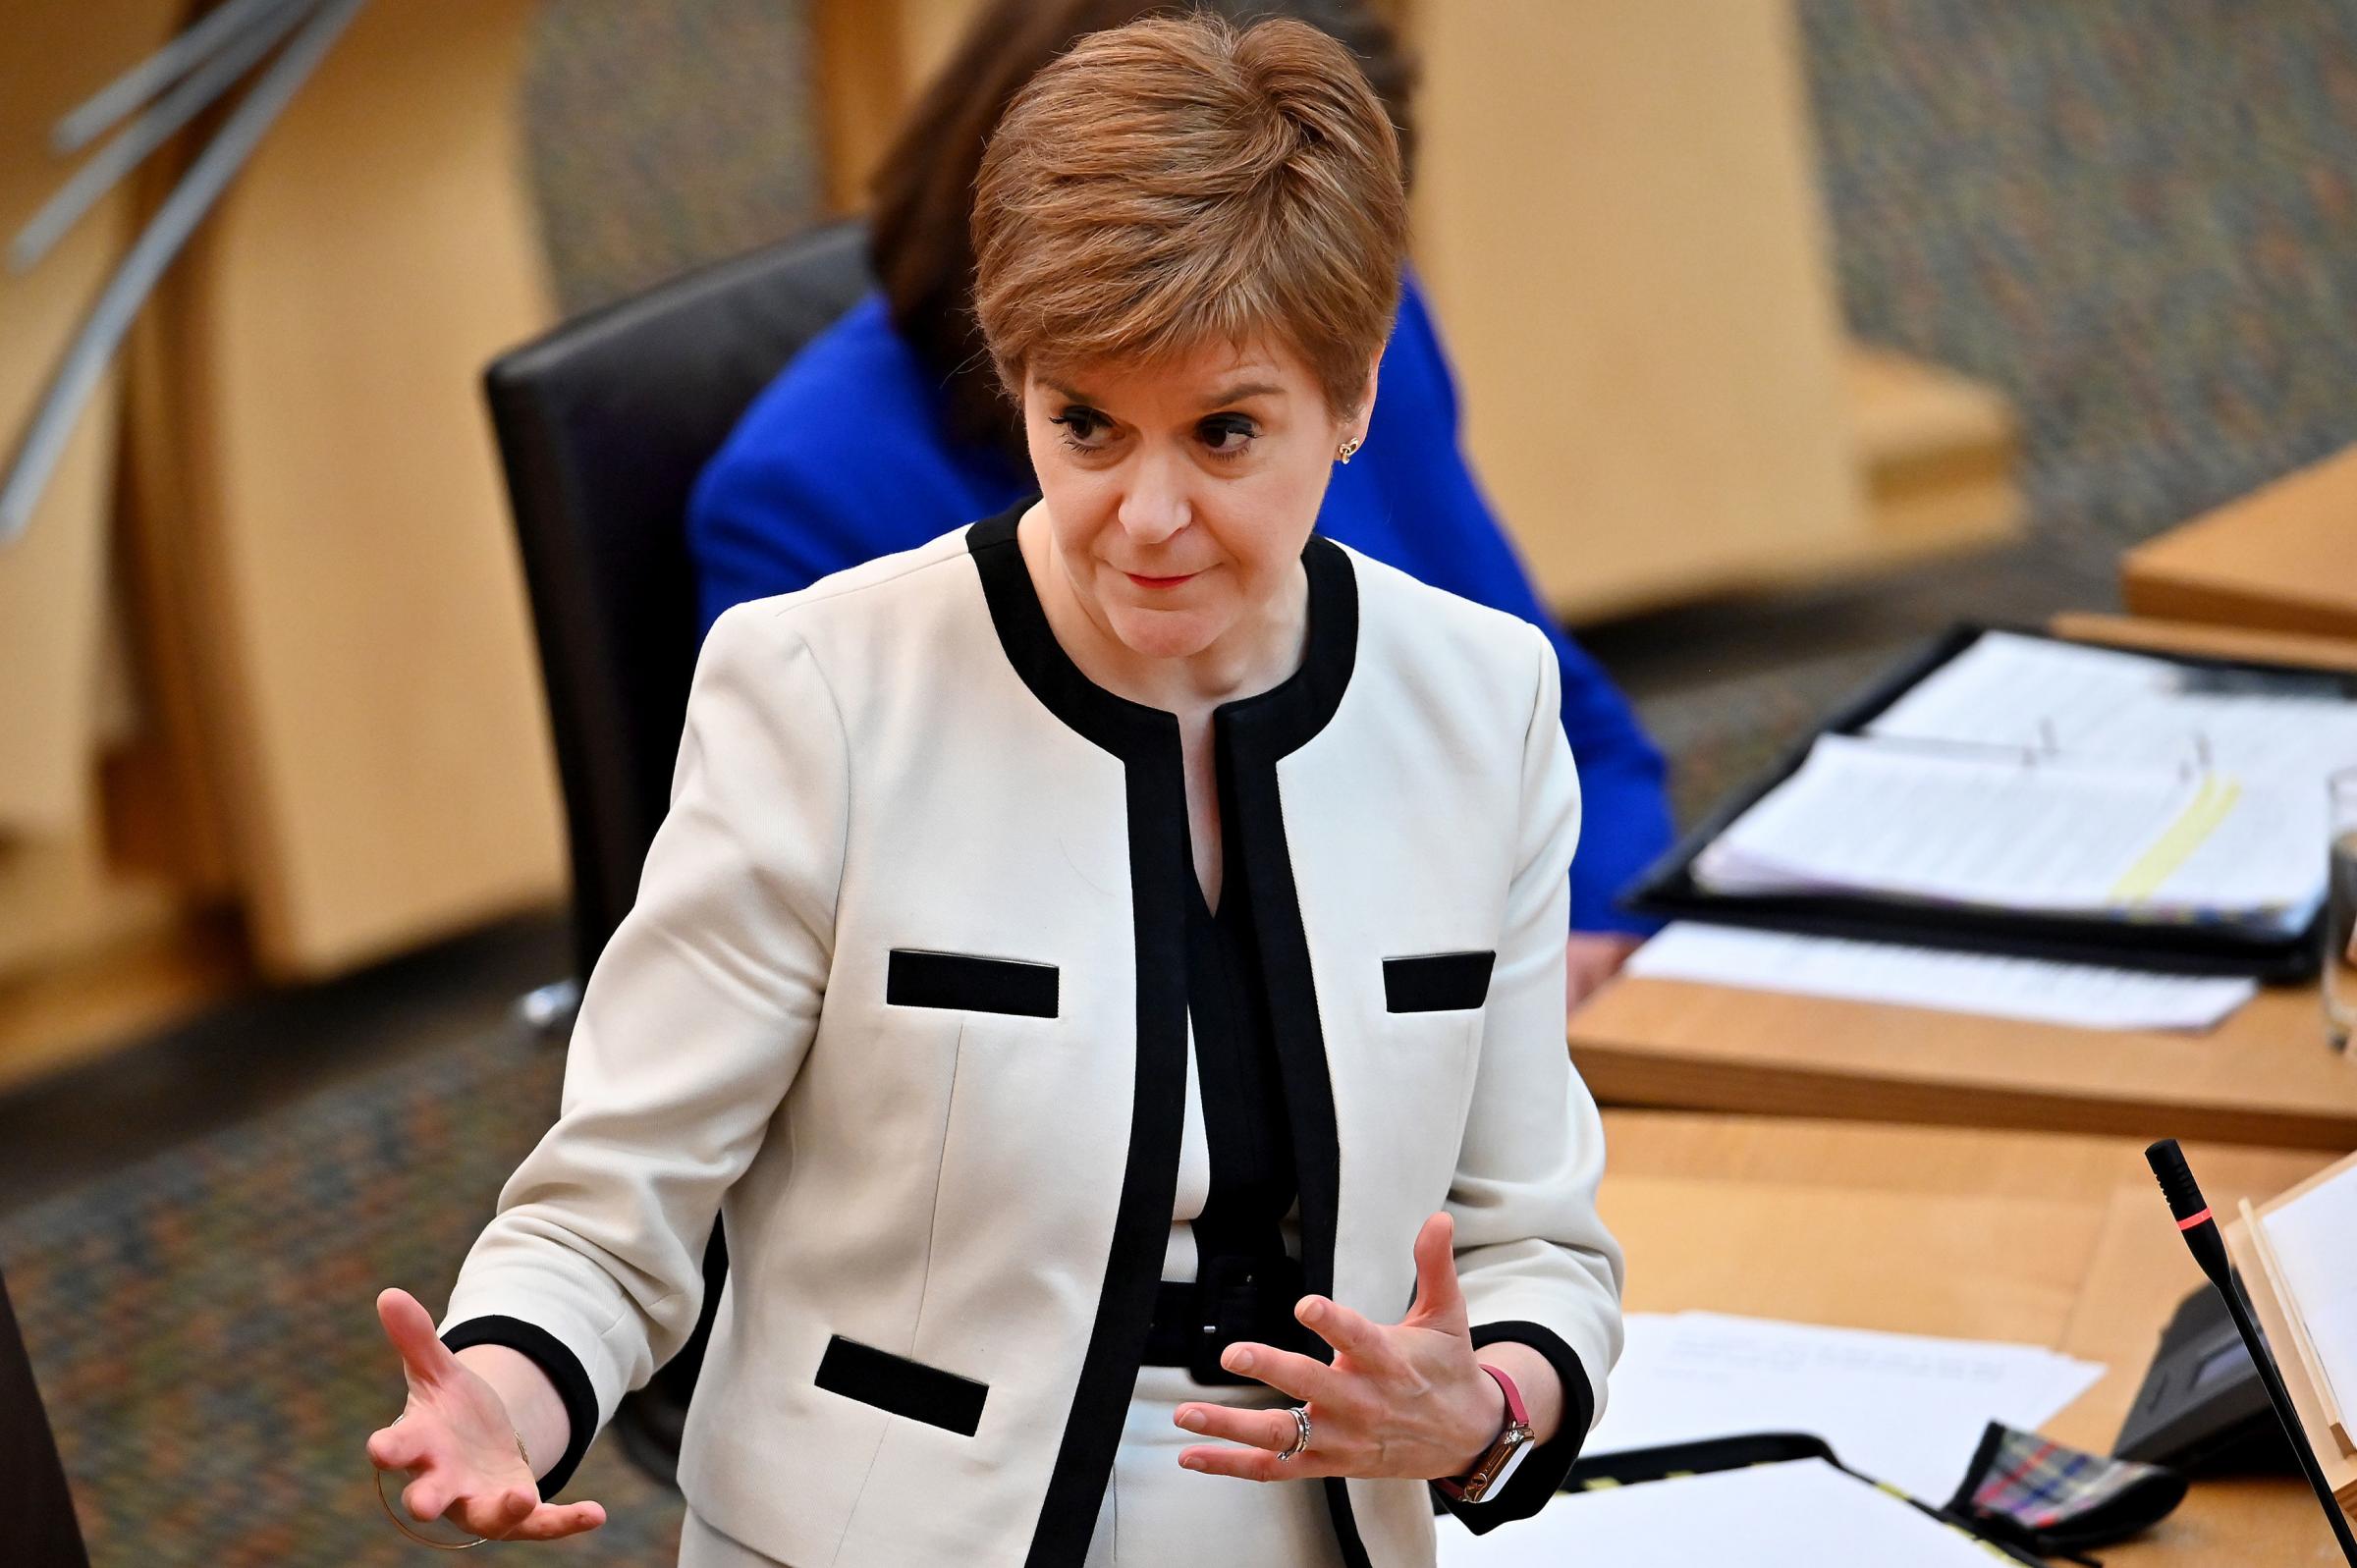 Nicola Sturgeon cites 'anti-Catholic abuse' as difference between Rangers and Scotland fan gatherings